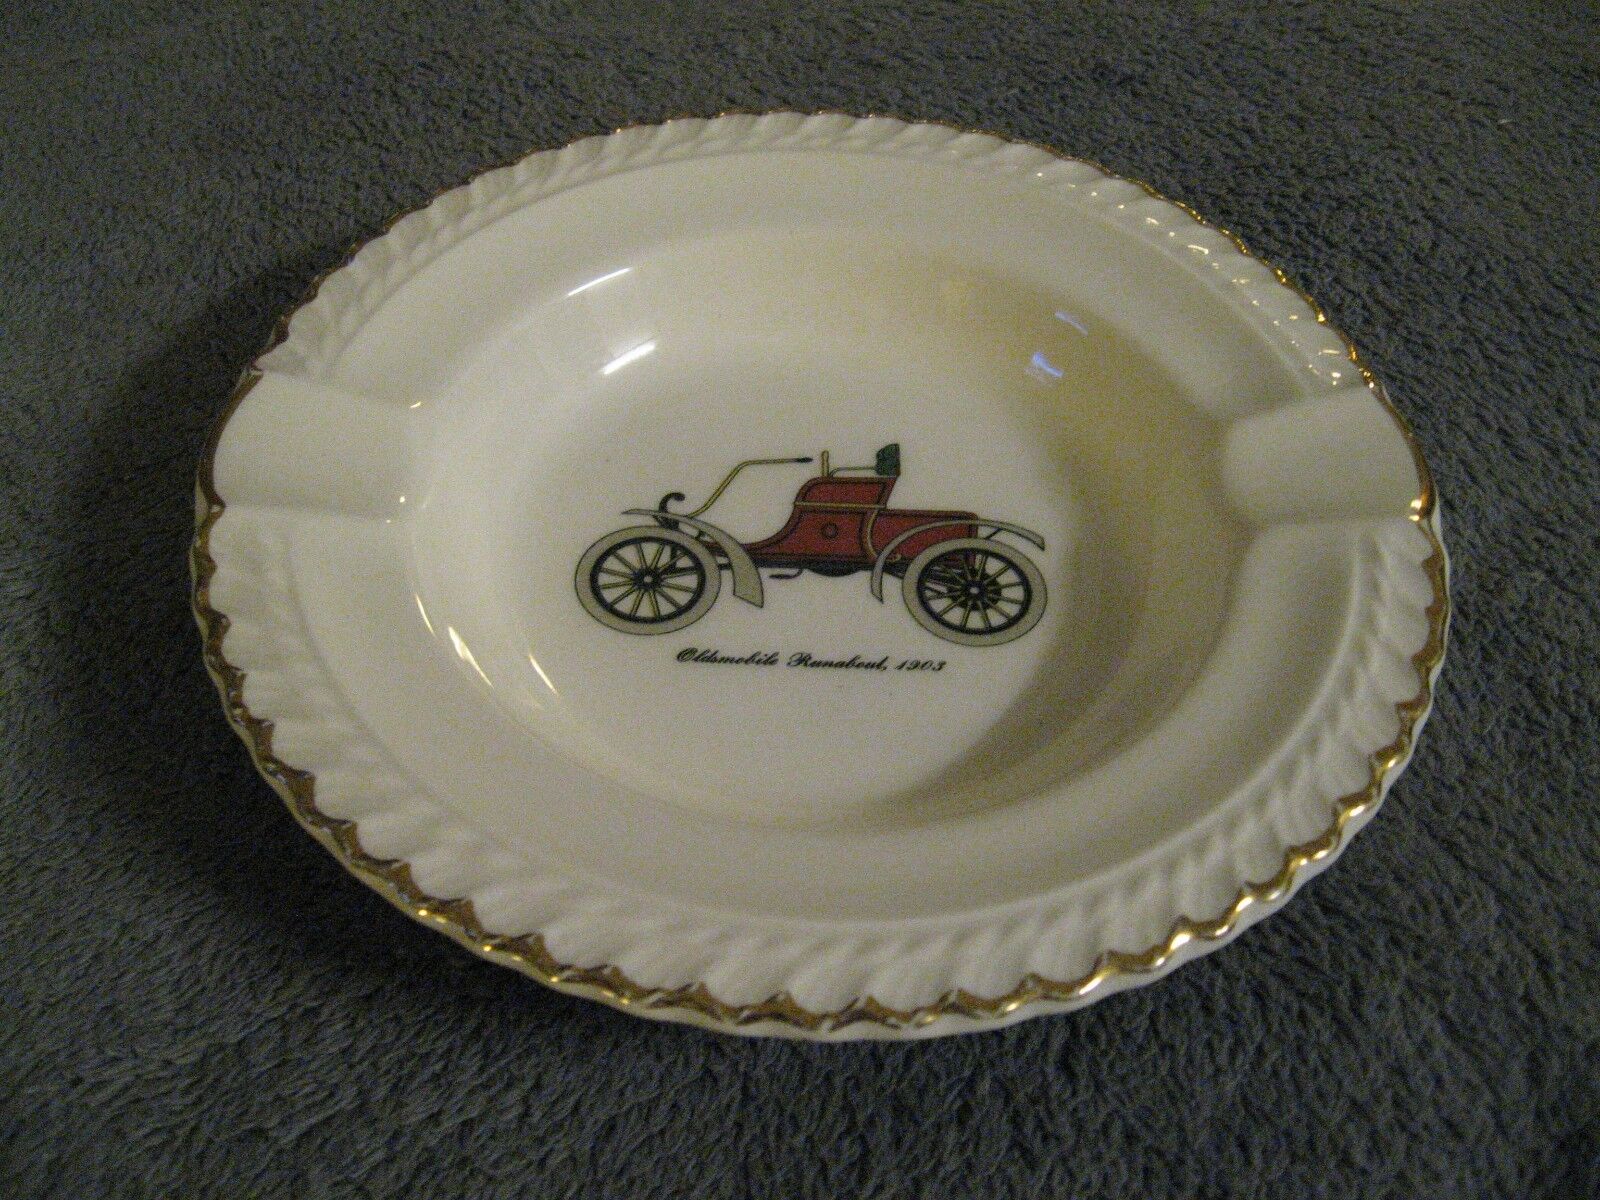 Harkerware Harker Pottery OH USA Vintage Mid Century Oldsmobile Runabout Ashtray